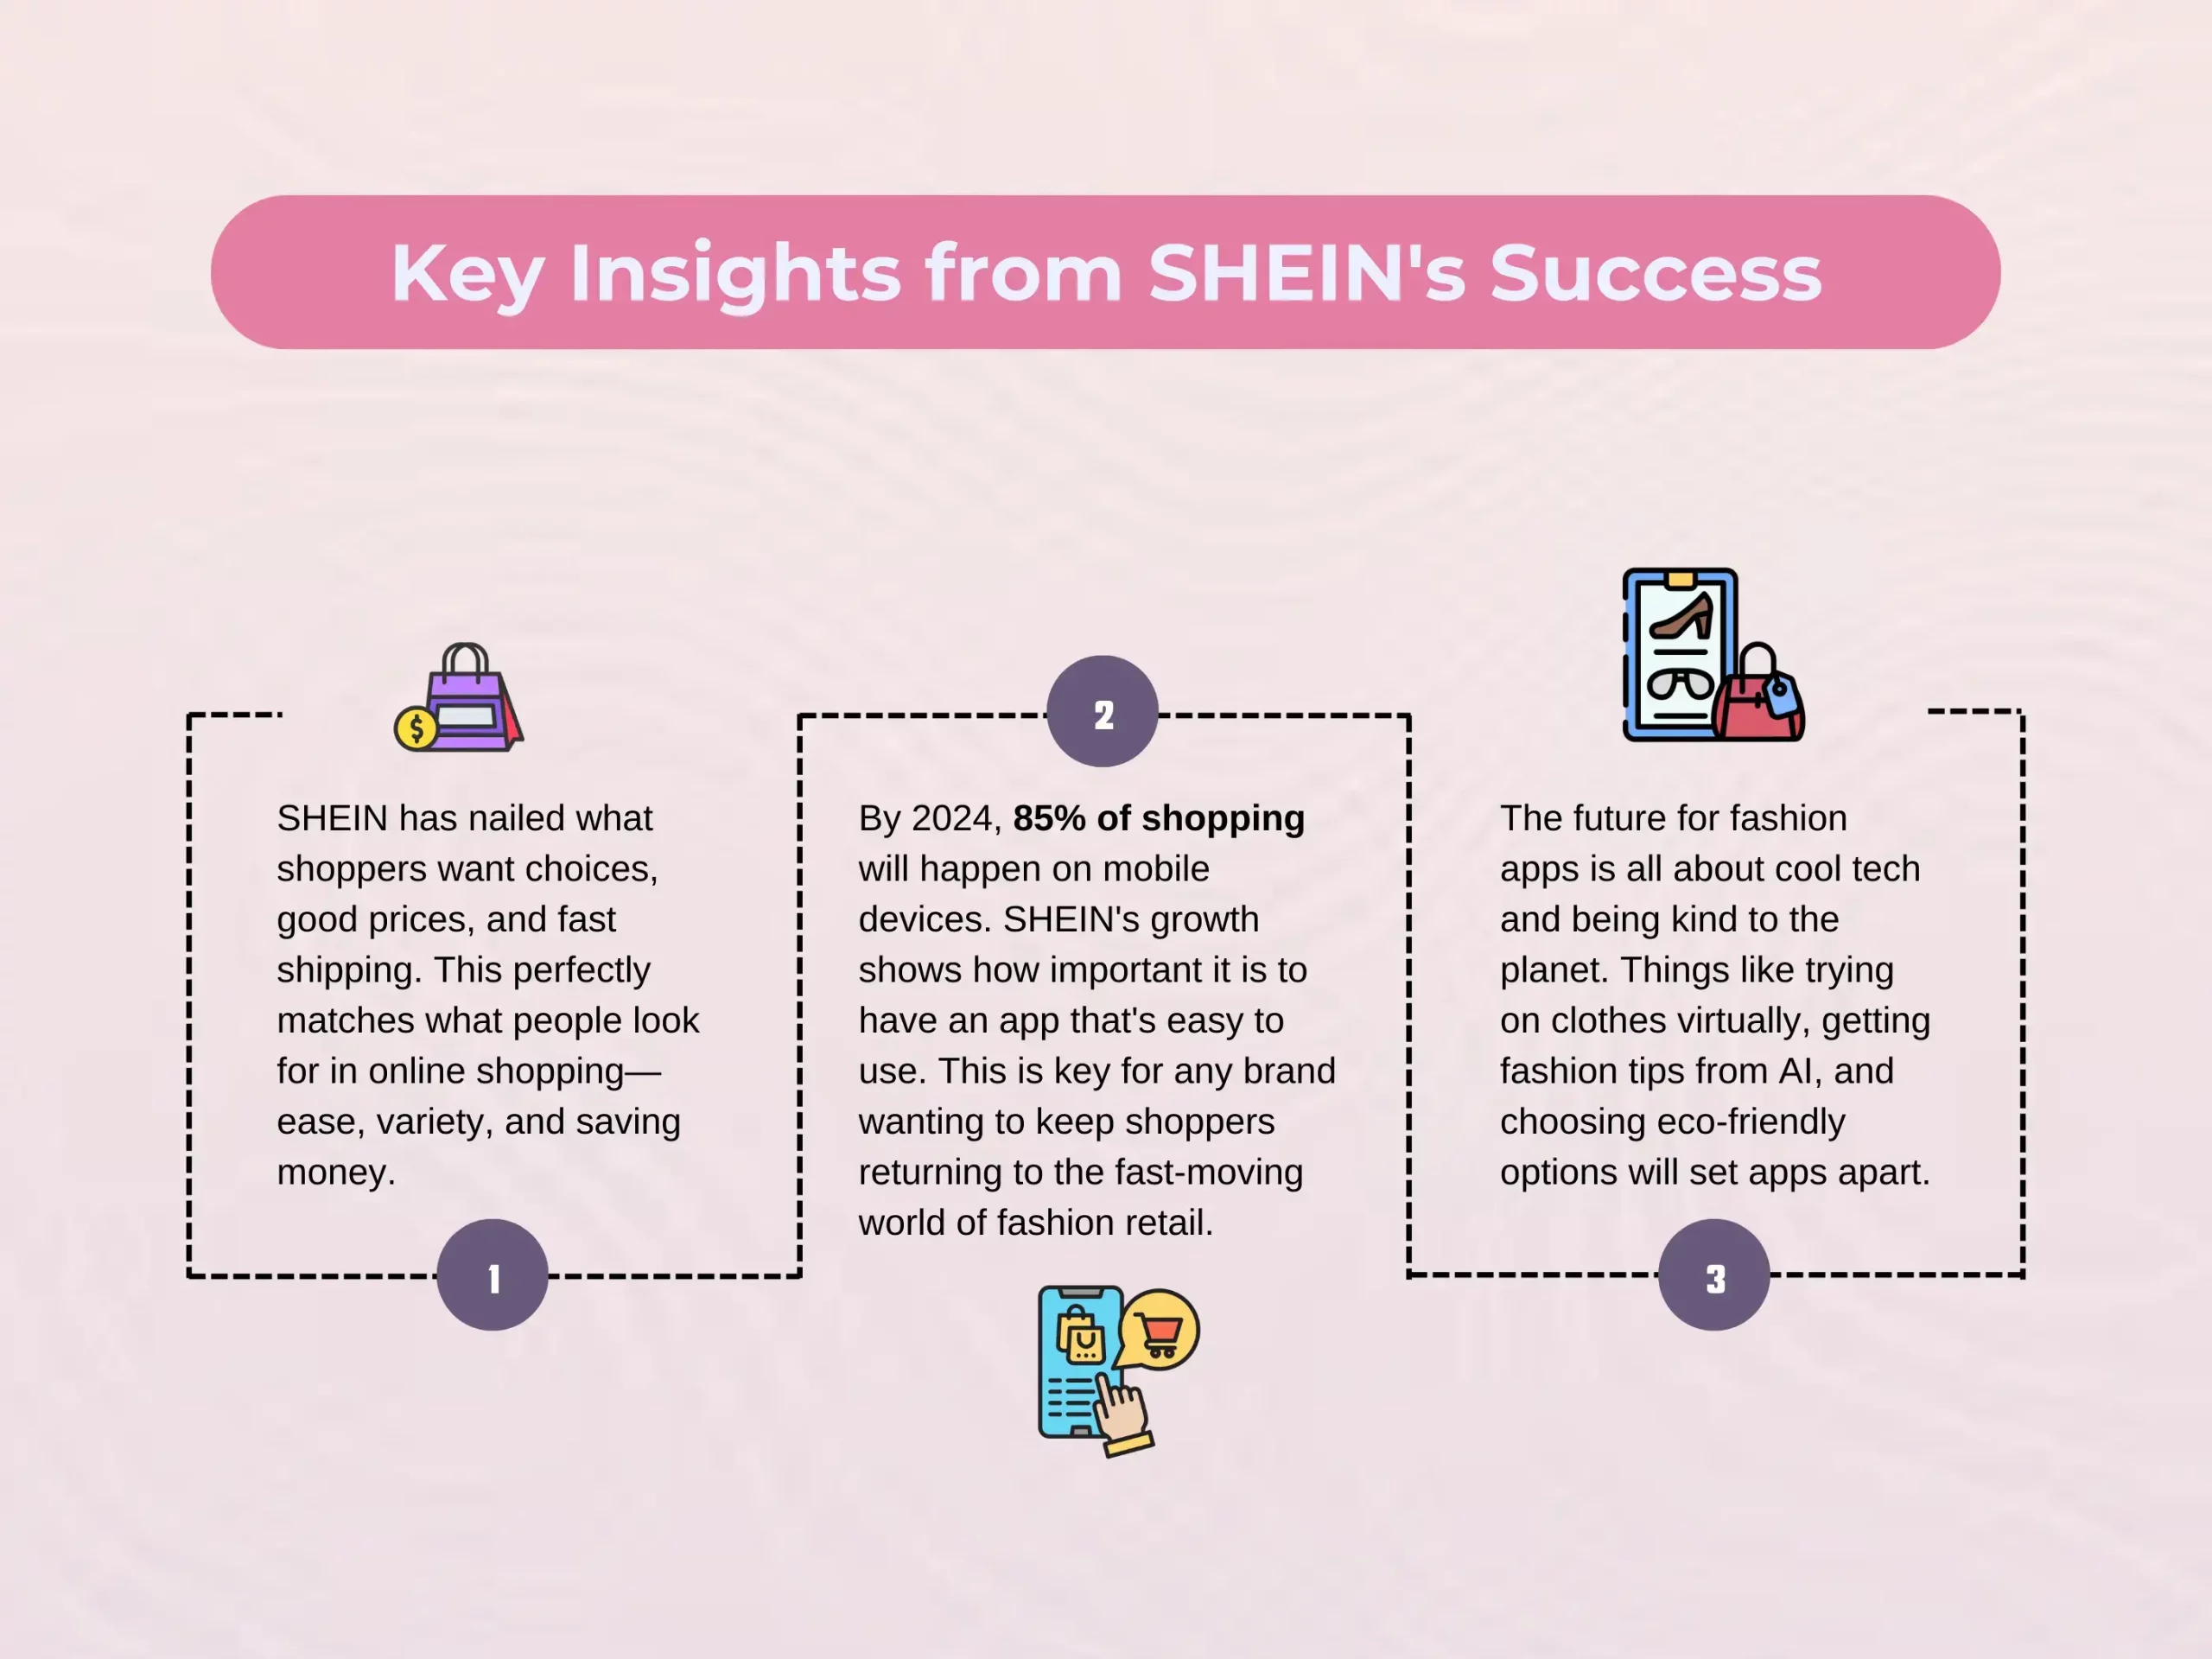 Key Insights from SHEIN's Success